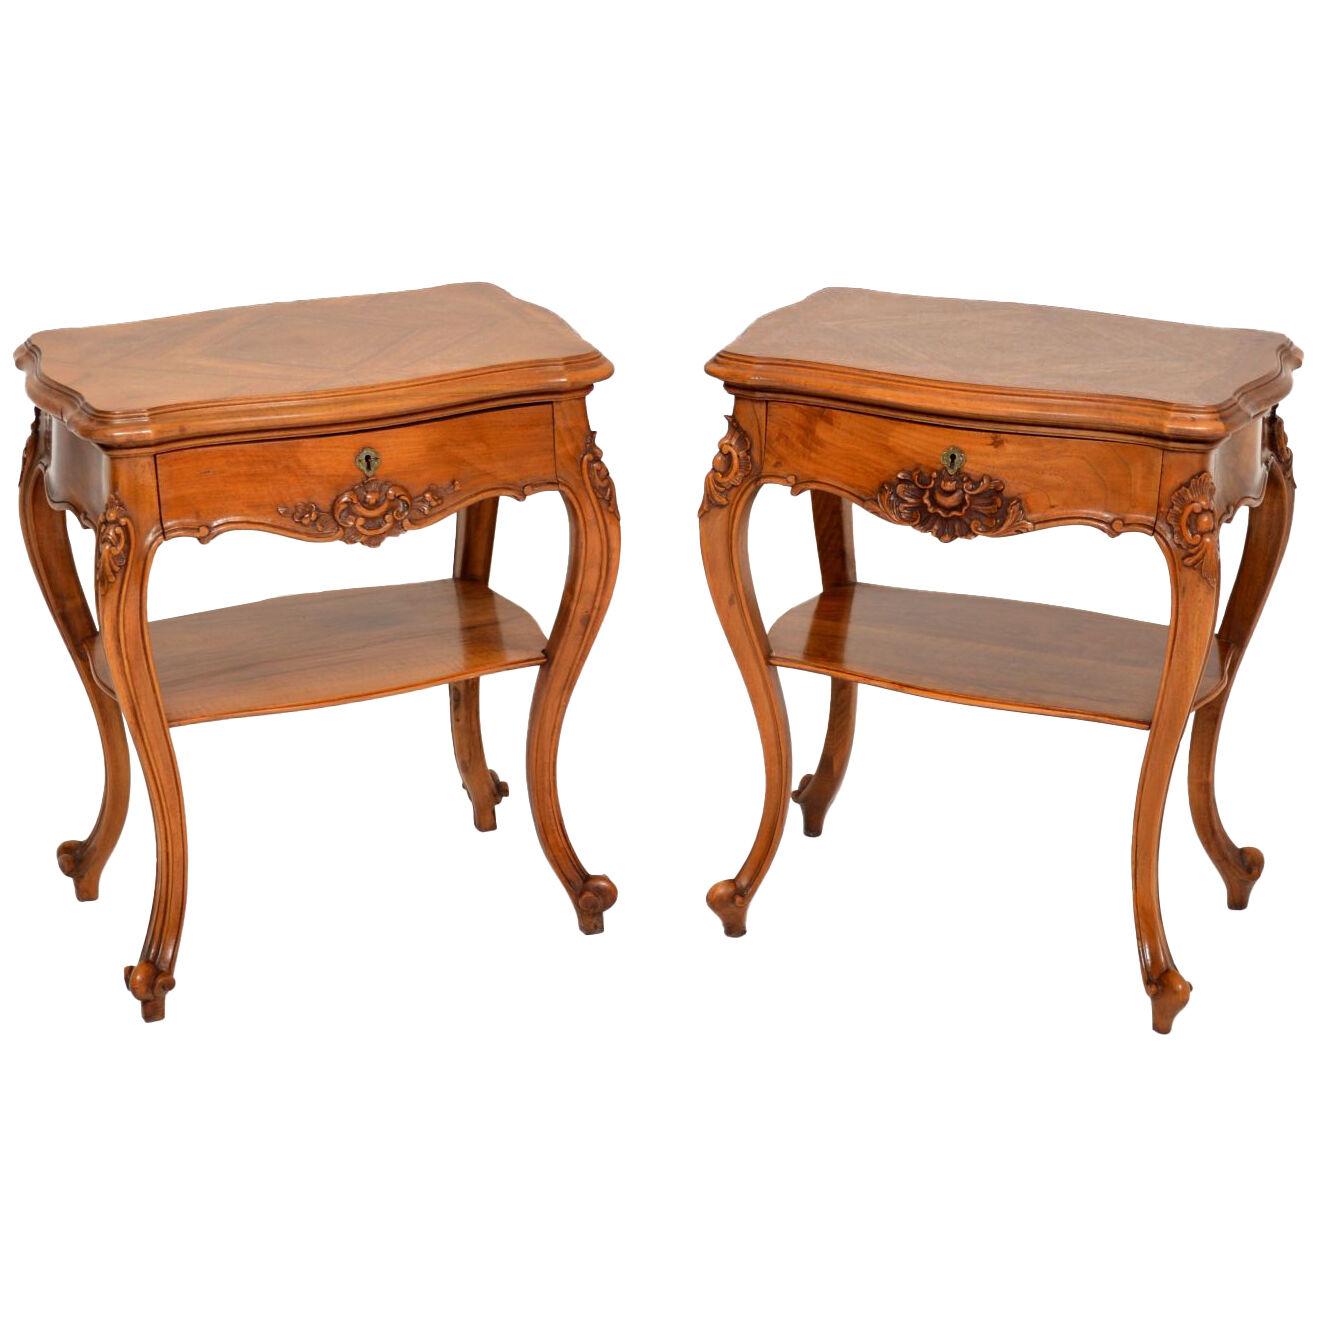 Pair of Antique French Walnut Side or Bedside Tables